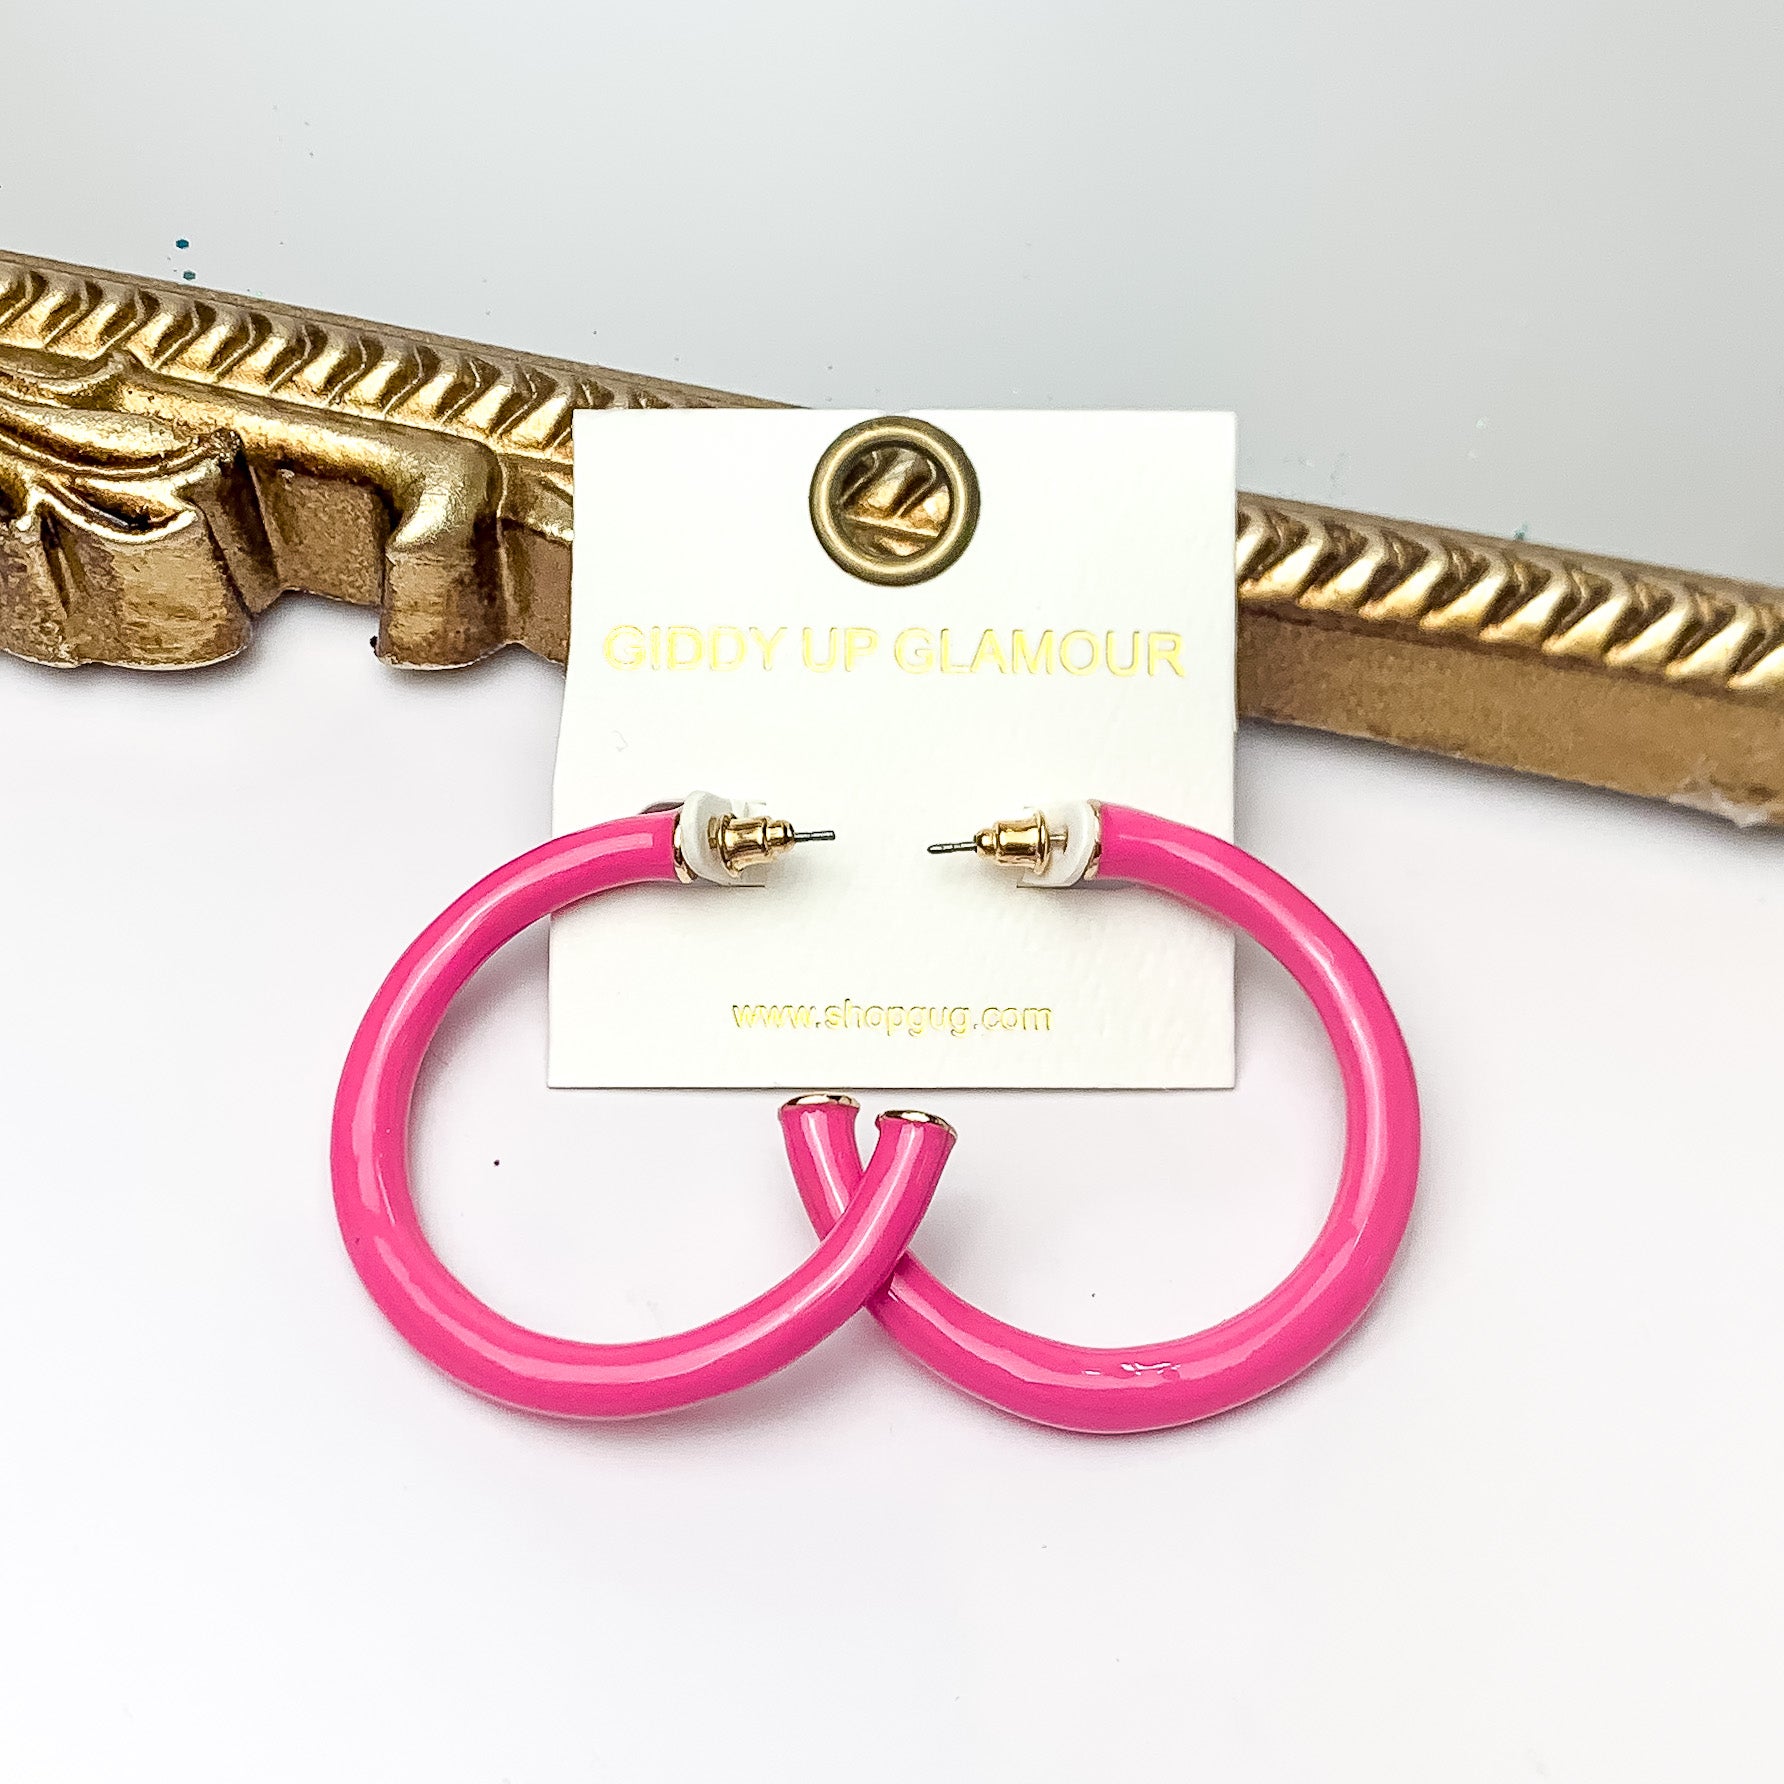 Plan For Cabo Large Hoop Earrings in Hot Pink. Pictured on a white background with a gold frame behind the earrings.